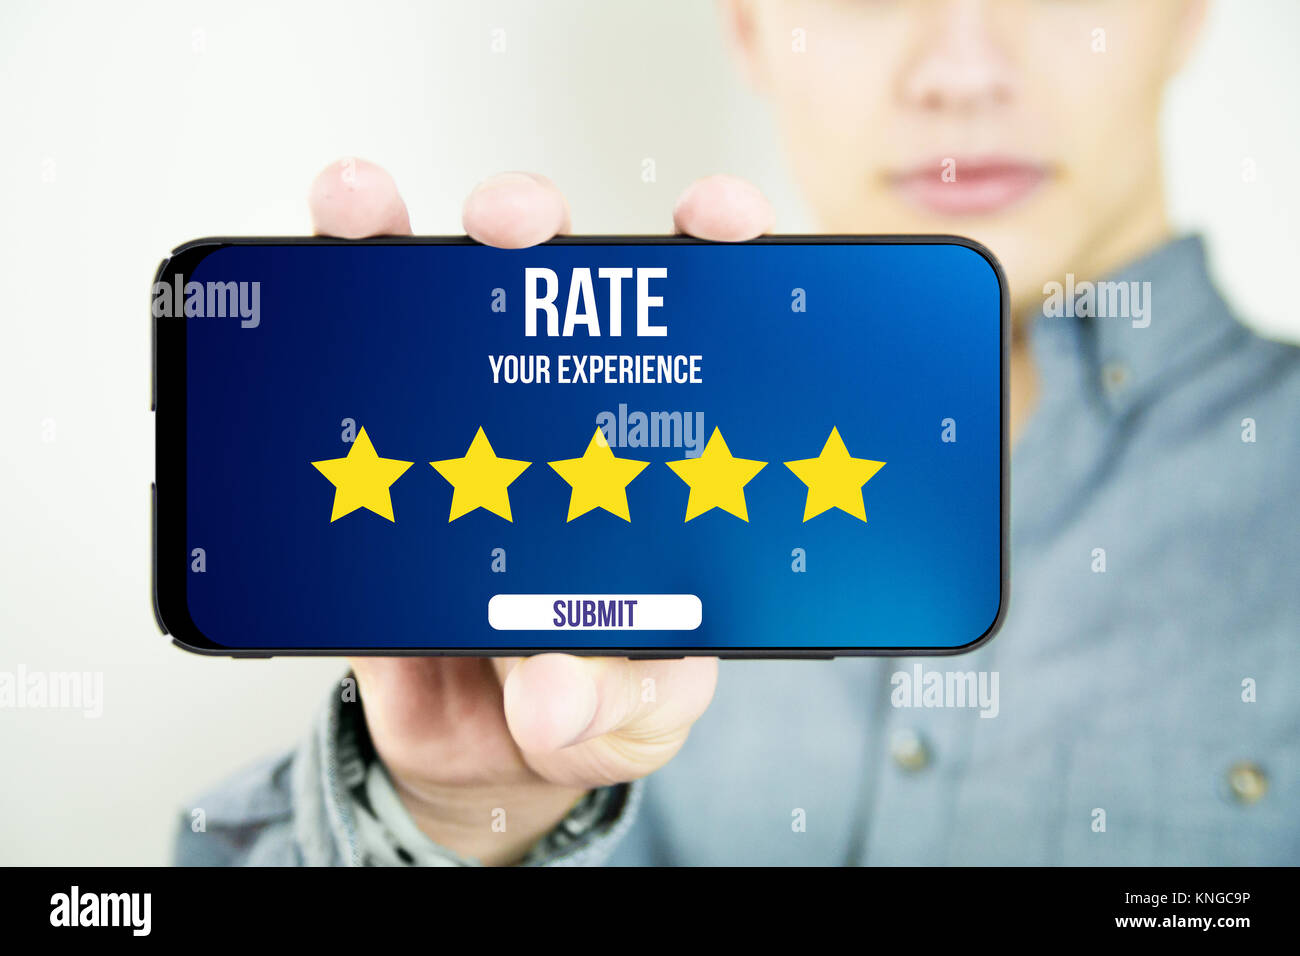 young man holding and showing a 5 stars ratingy full screen smartphone Stock Photo